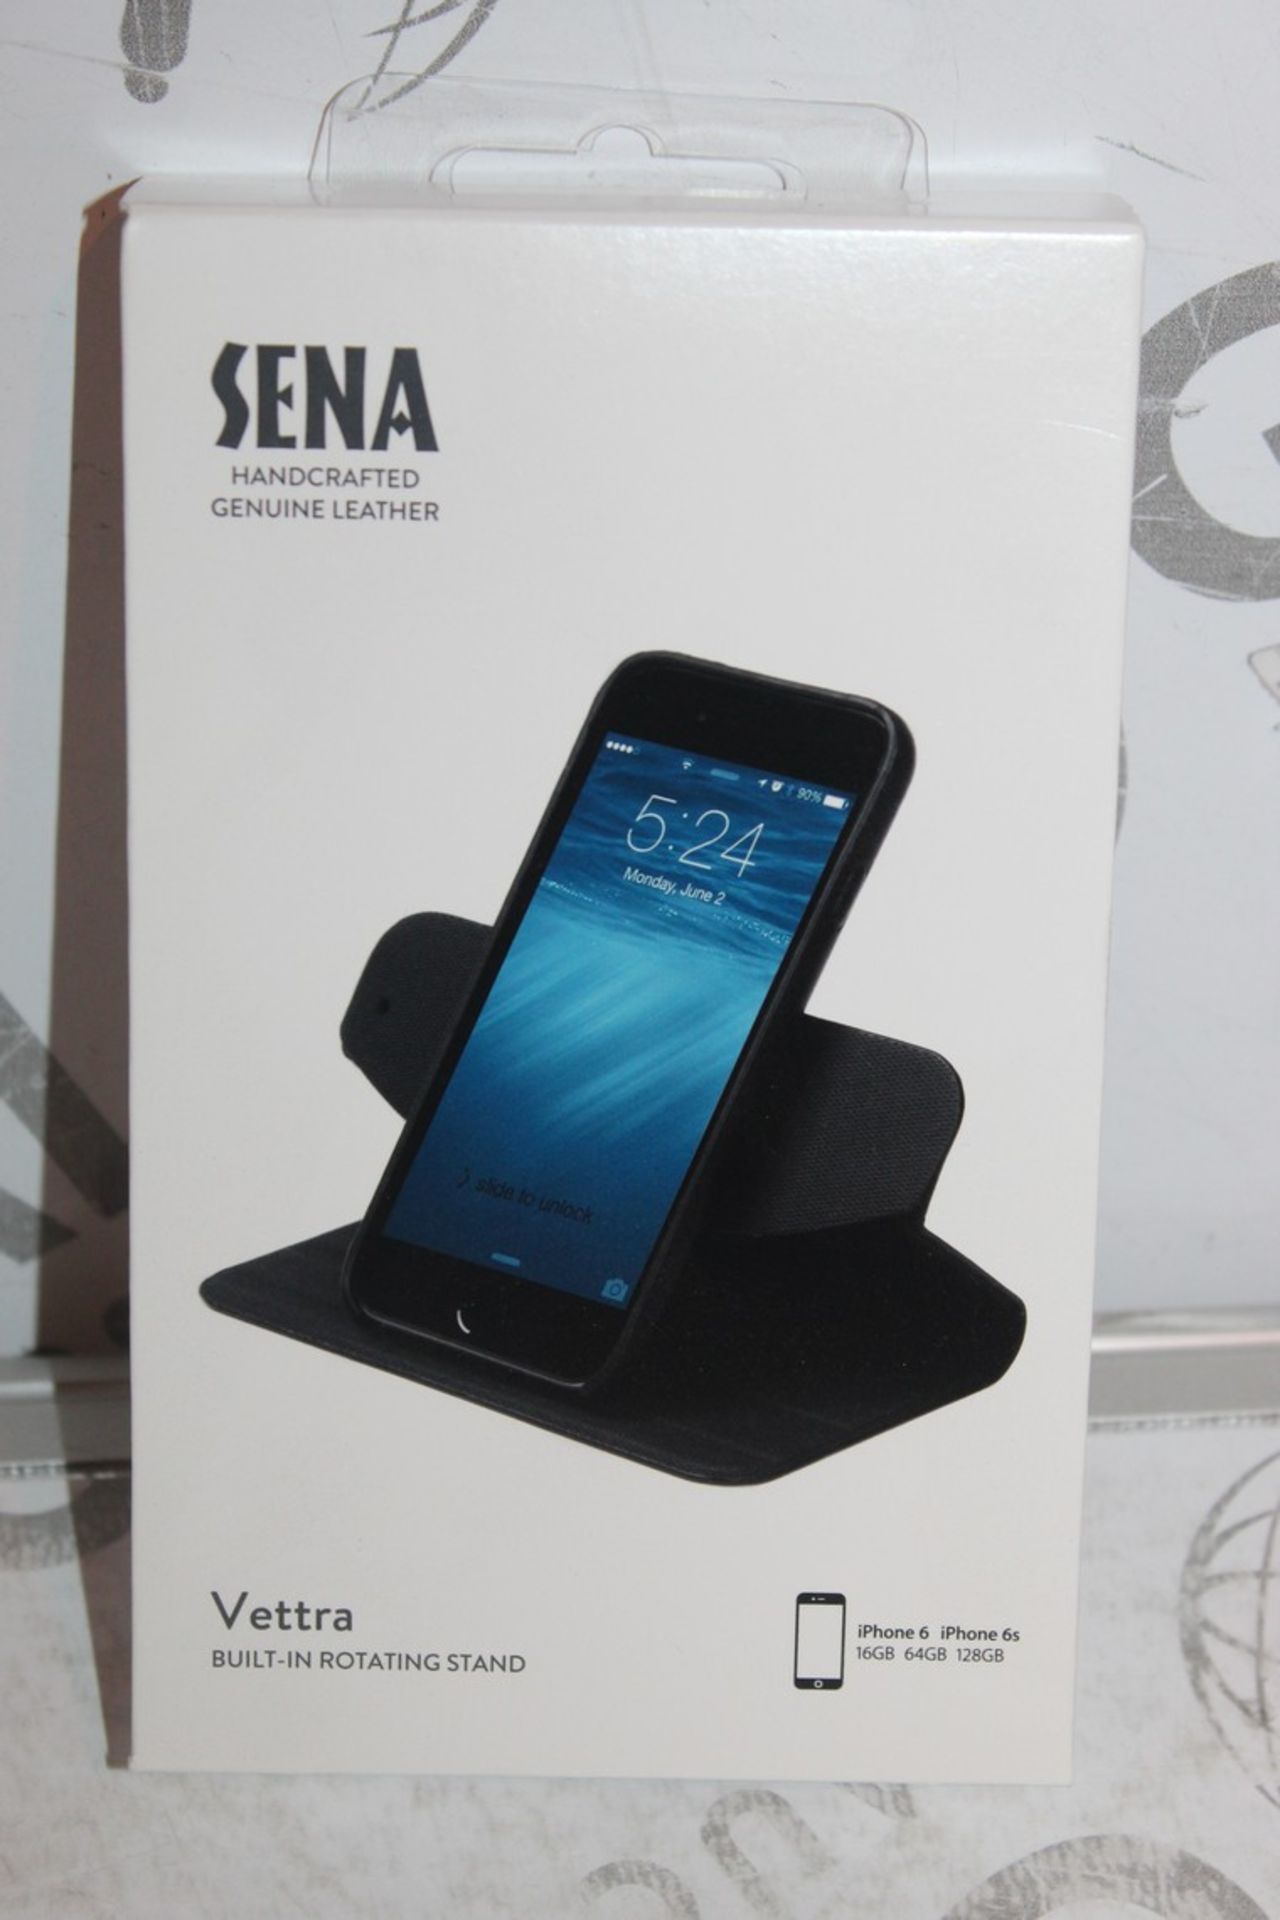 Lot to Contain 2 Brand New Sena Vettra Iphone 6 and 6S Phone Cases with Built In Rotating Stand